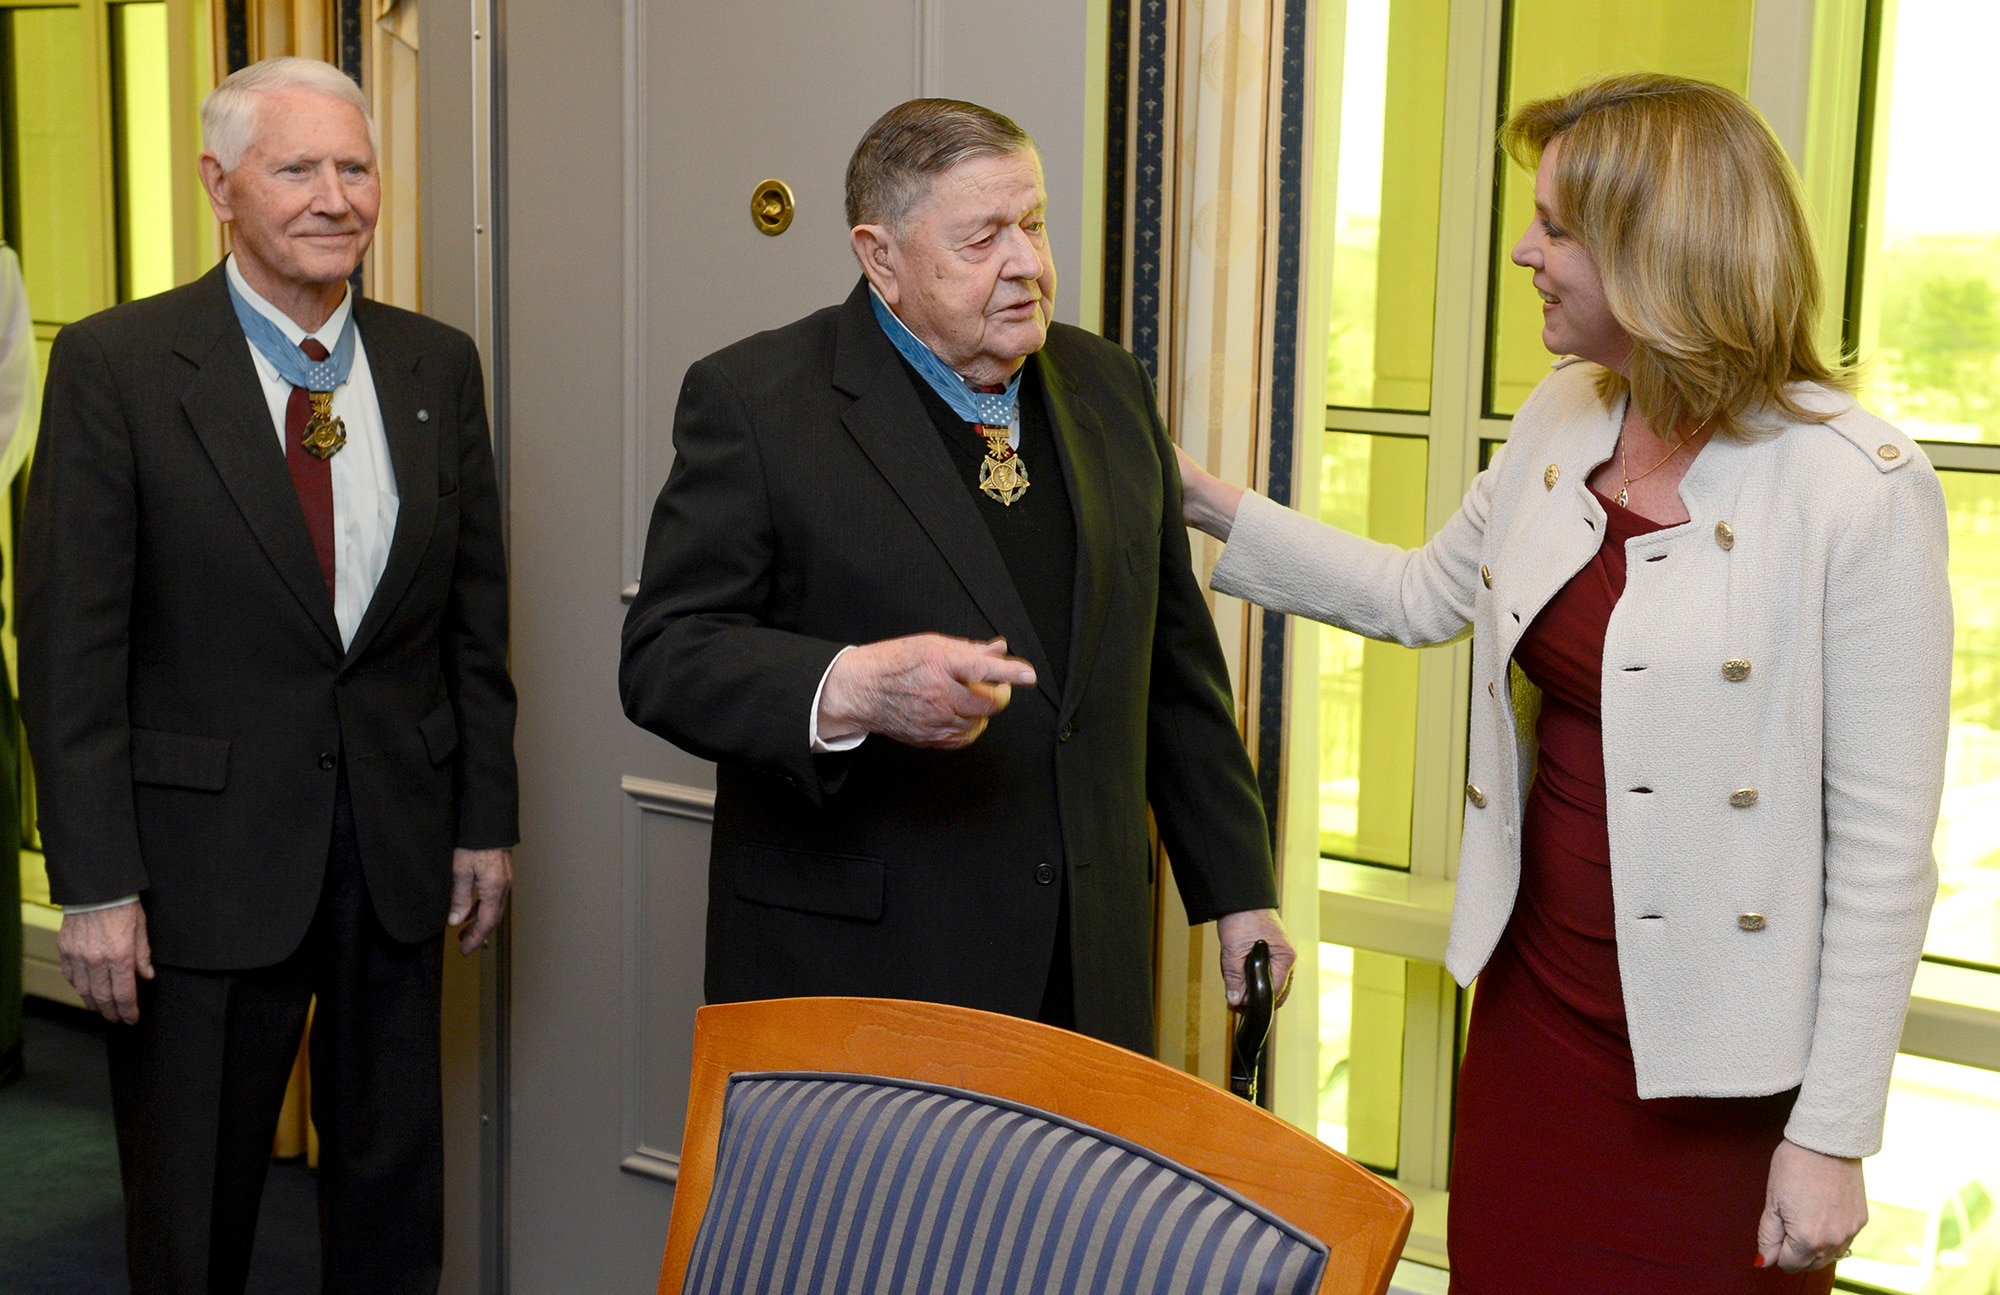 Retired Col. Joe Jackson, followed by Col. Leo Thorsness, meets Secretary of the Air Force Deborah Lee James in her office March 24, 2015, in Washington D.C.  Jackson and Thorsness, both Medal of Honor recipients, were in the Pentagon for a Q-and-A session with members of the Air Staff, hosted in the Hall of Heroes.  Jackson and Thorsness also met with Air Force Vice Chief of Staff Gen. Larry Spencer.  (U.S. Air Force photo/Scott M. Ash)